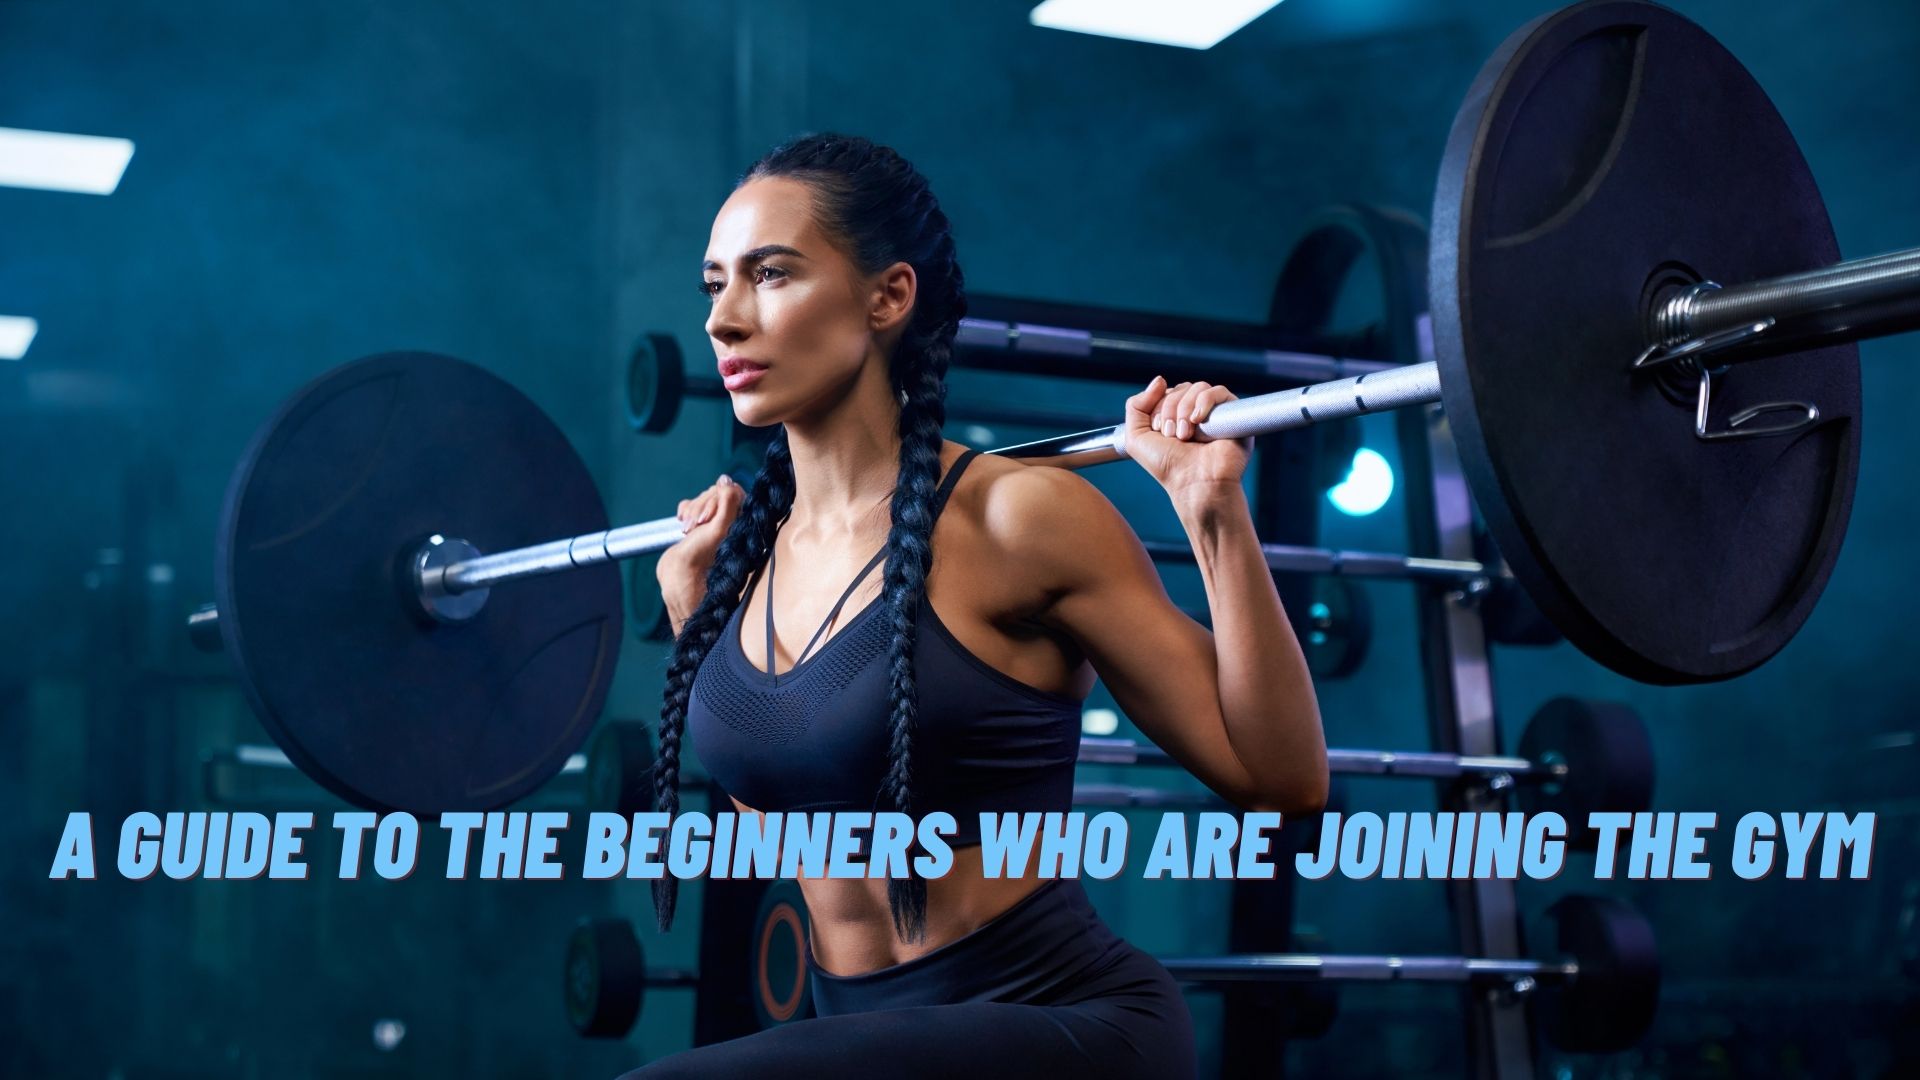 A Guide to the Beginners Who Are Joining the Gym